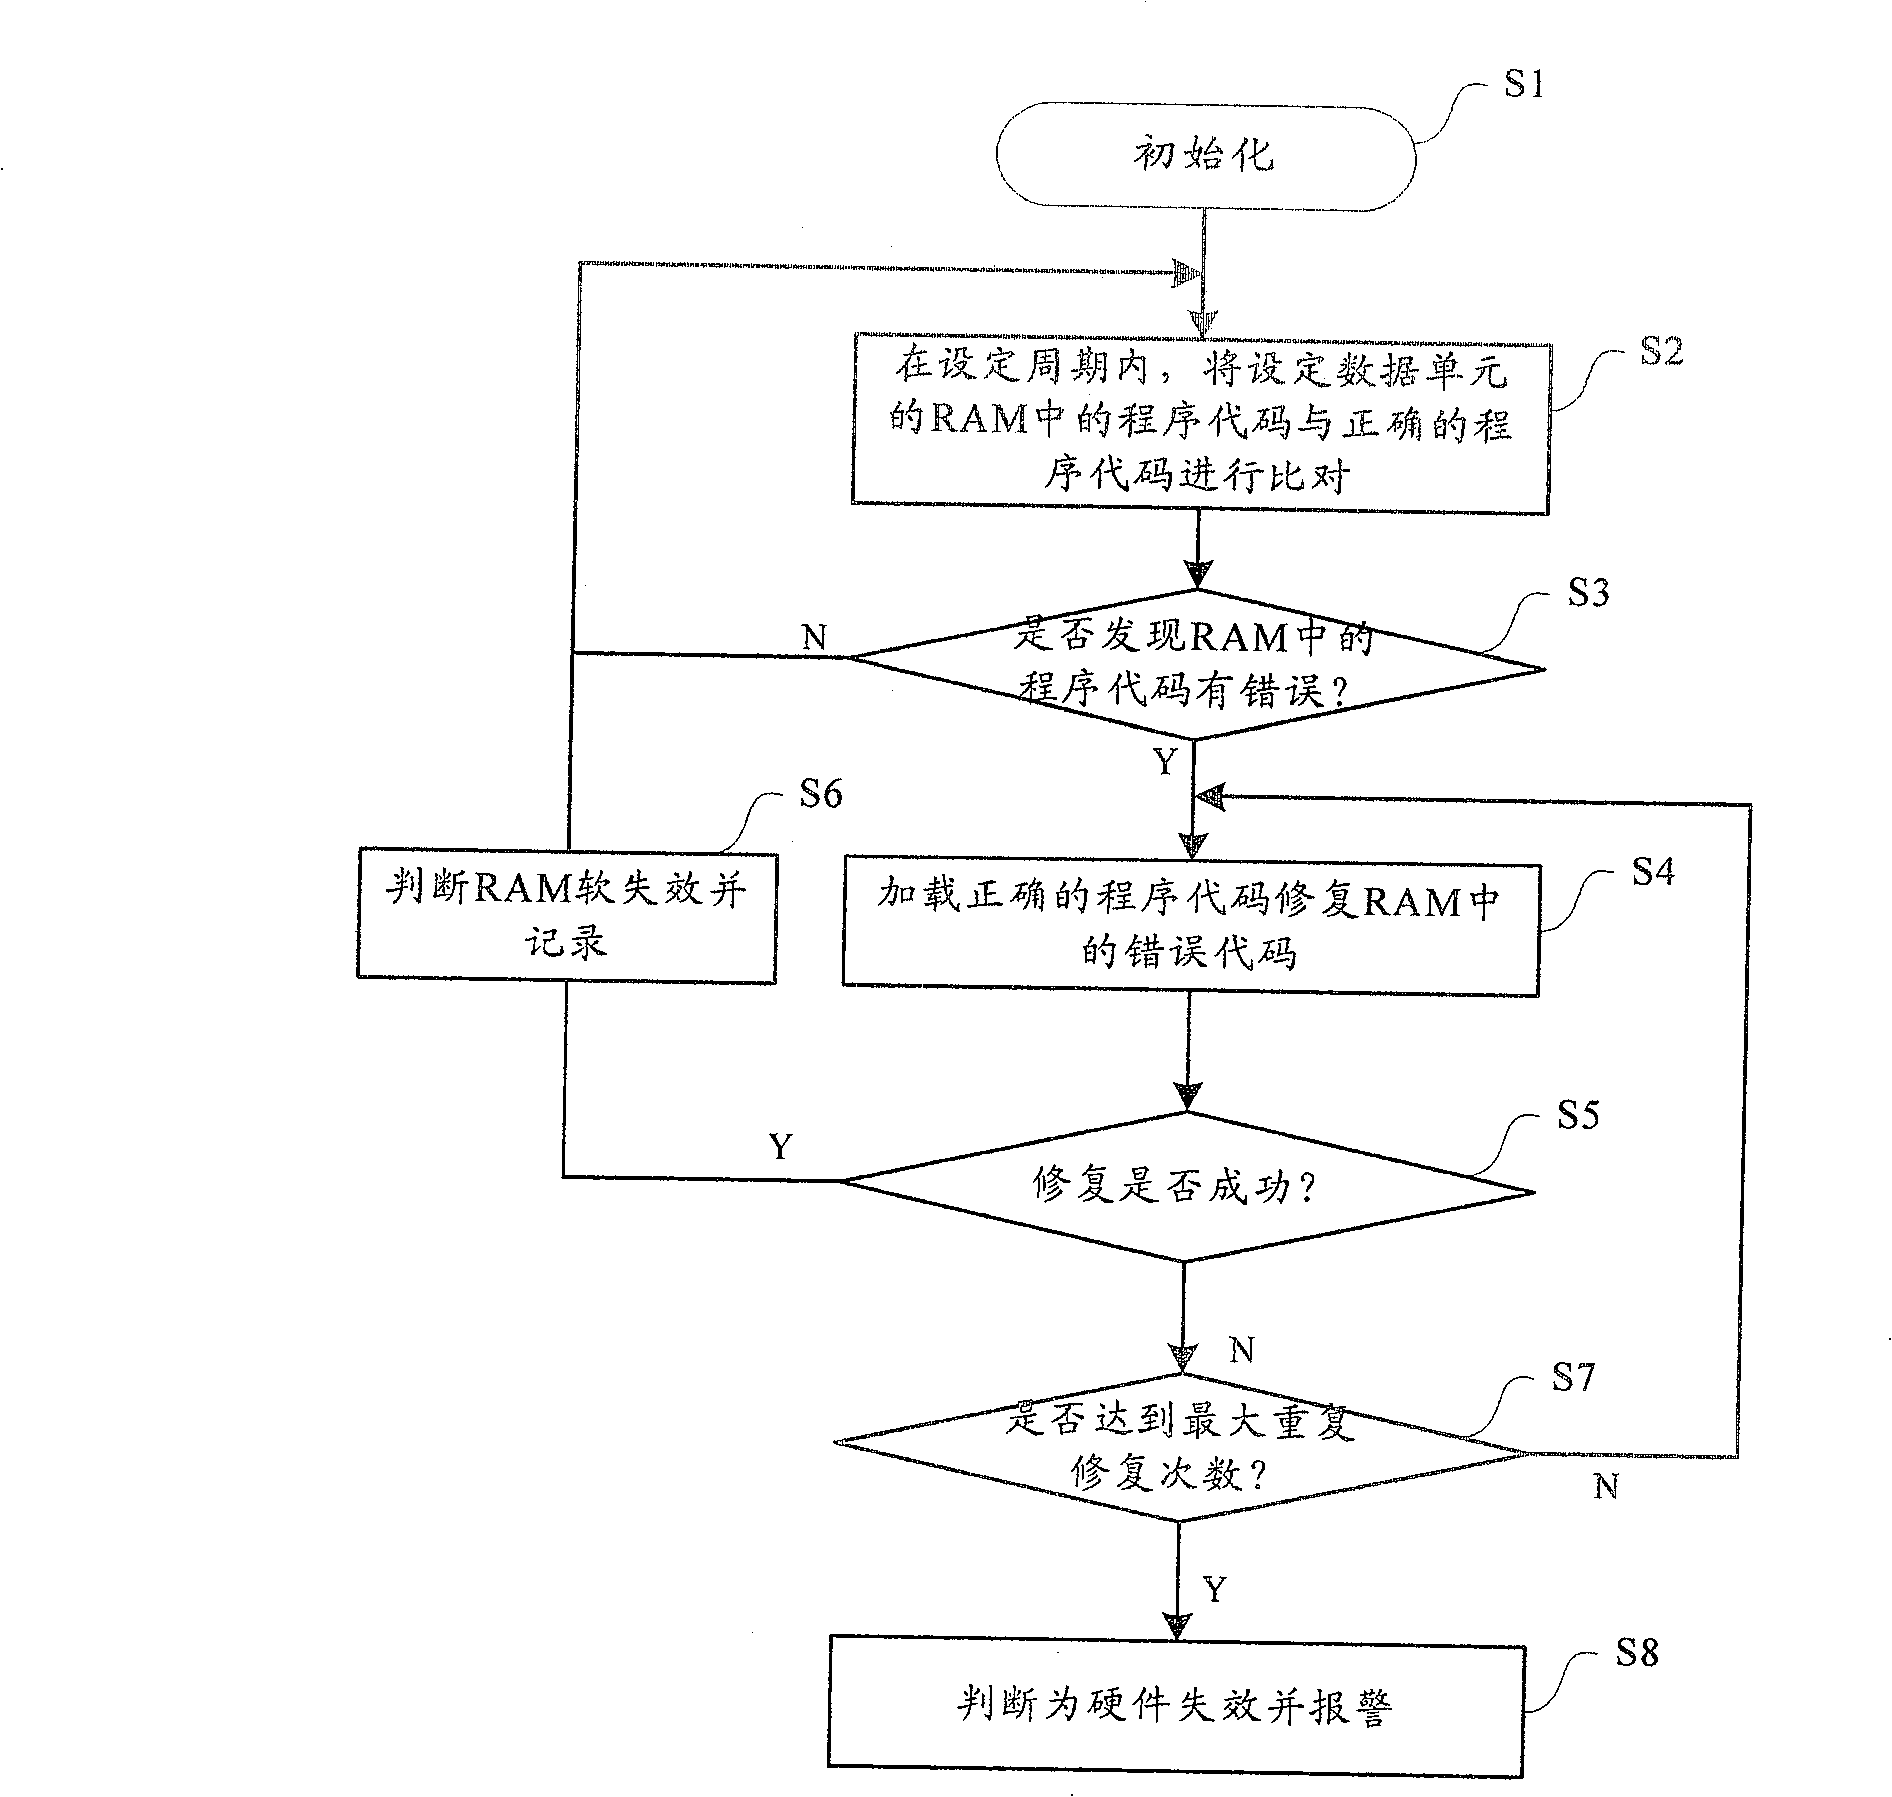 Random storage failure detection processing method and its system